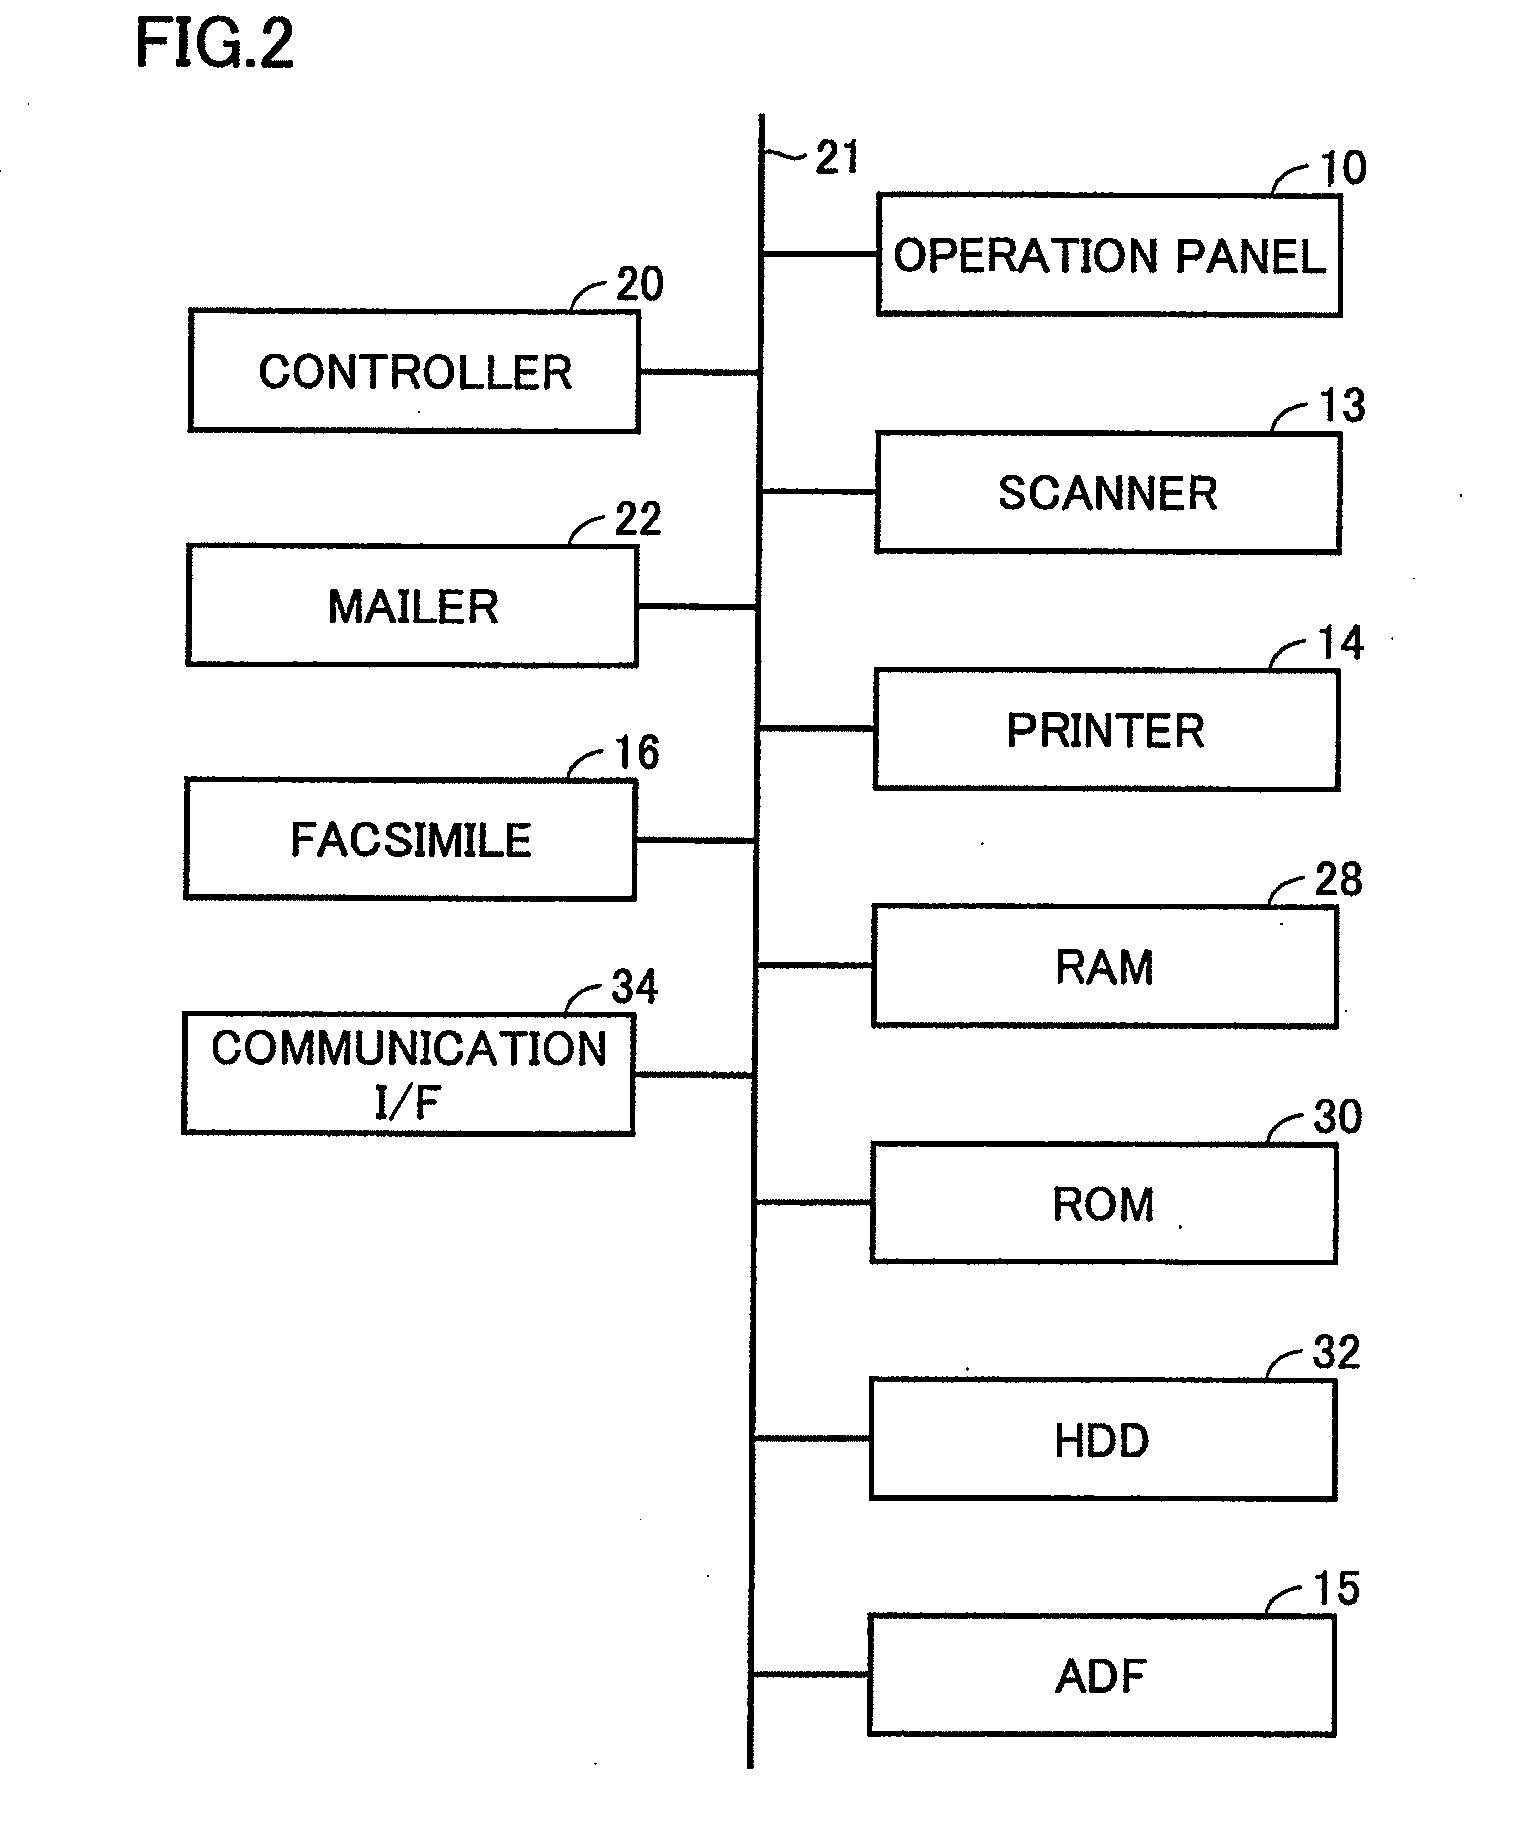 Image scanning device capable of obtaining at high speed a scanned image of high quality and appropriate magnification, image scanning method, image formation apparatus, and recording medium